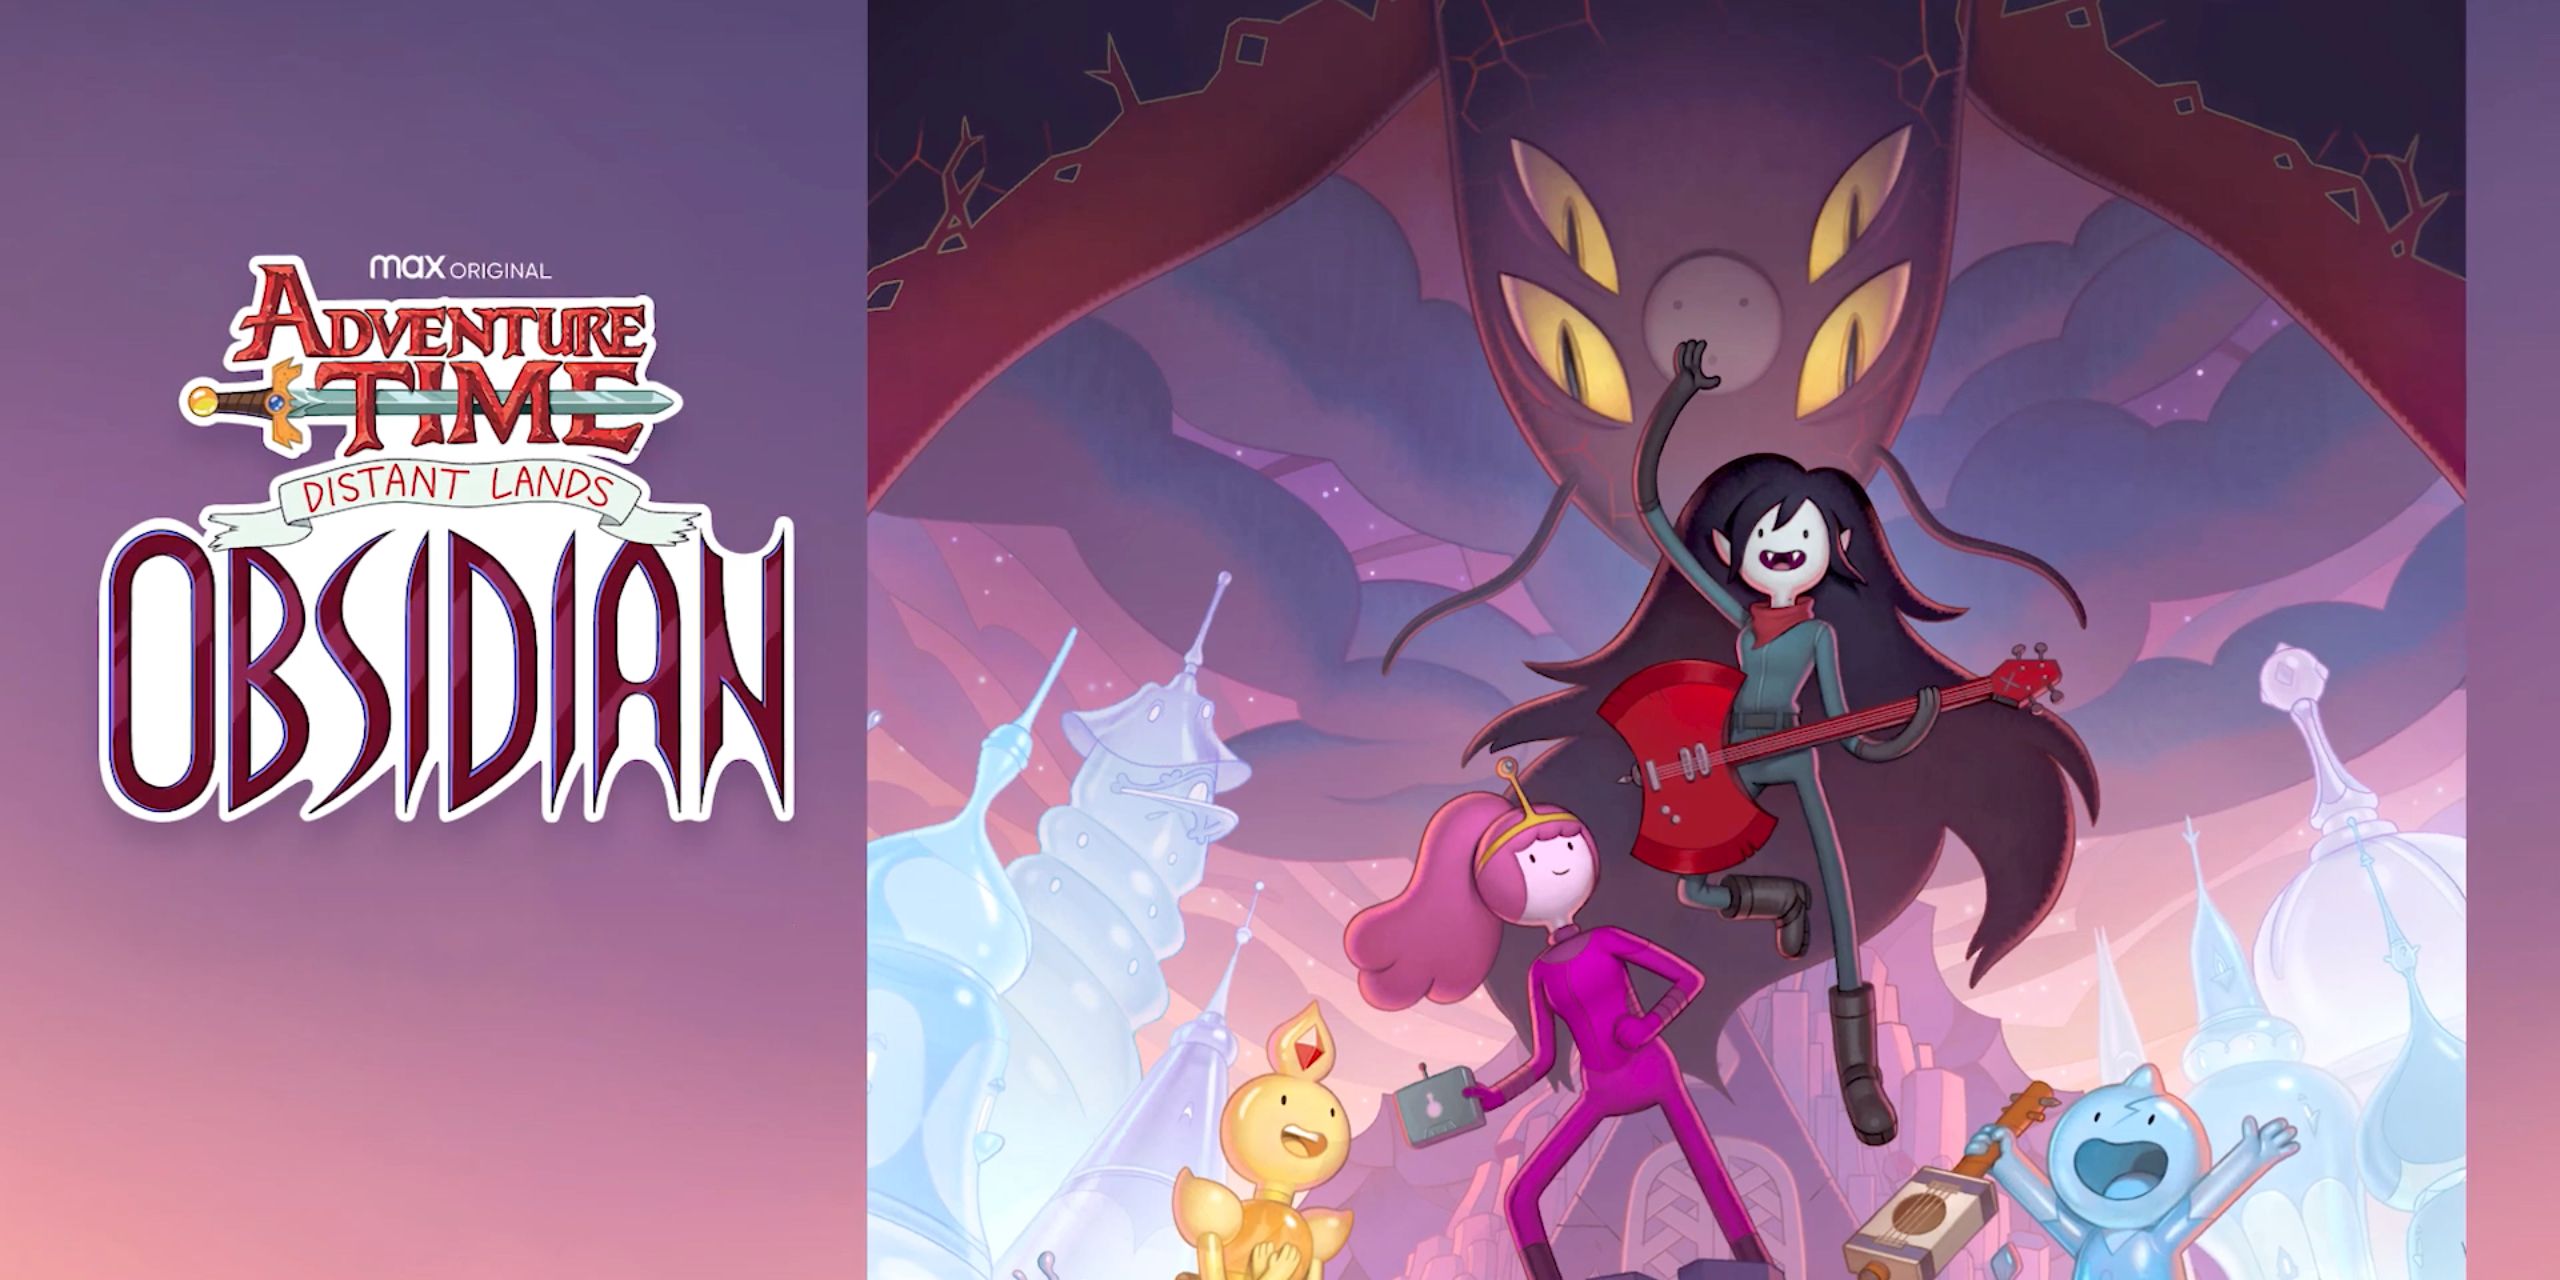 Marceline and Princess Bubblegum posing victoriously in Glass Kingdom while an ominous monster looms above them